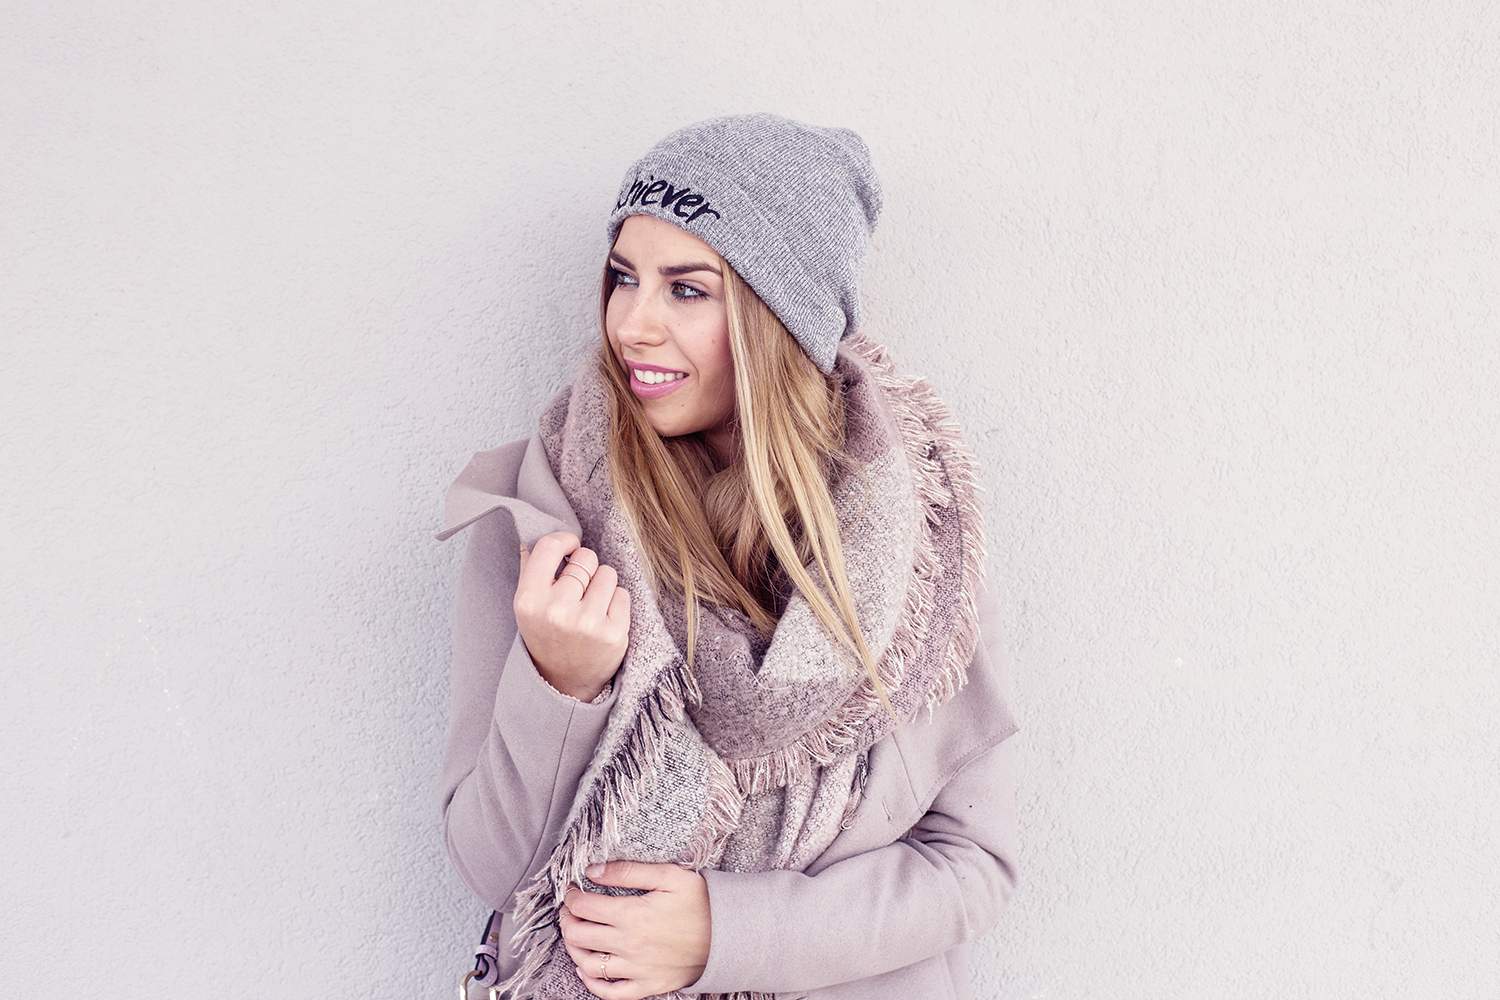 All_Saints_Coat_Forever21_Scarf_Rad_Co_Winterlook_Outfit_Luisa_Lion